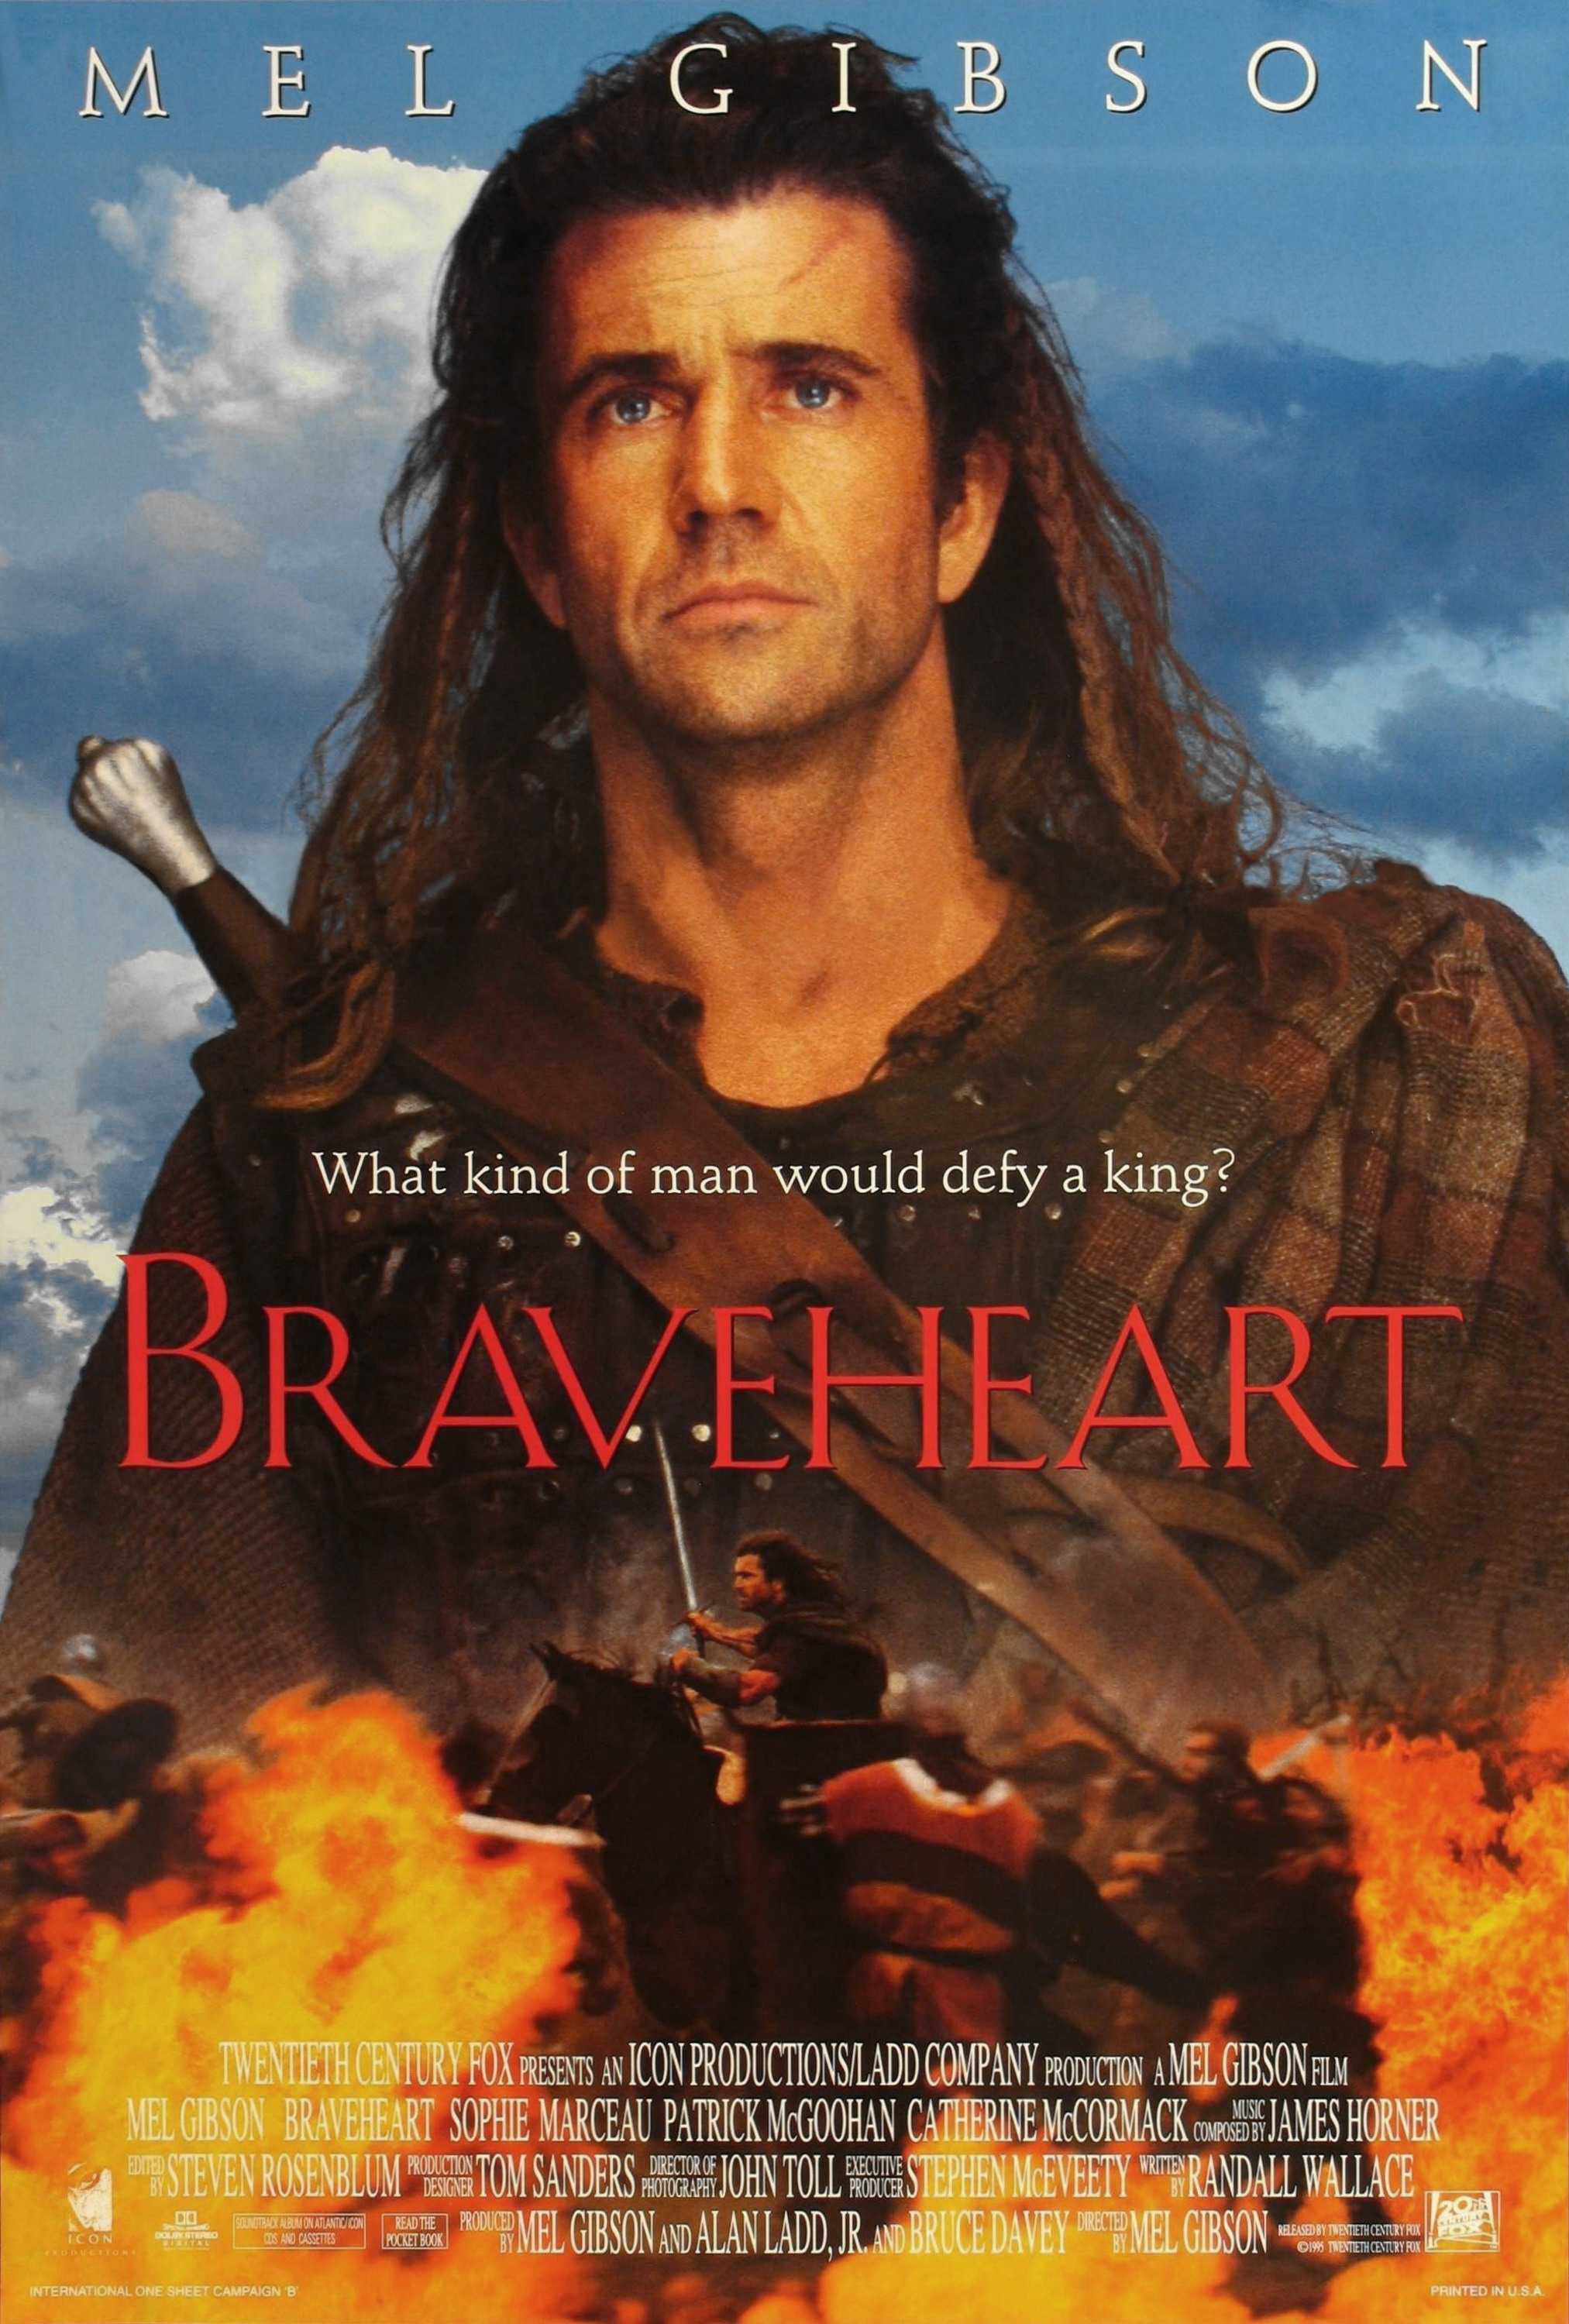 braveheart war movie review cast crew trailer quotes and transcript - Braveheart Quotes